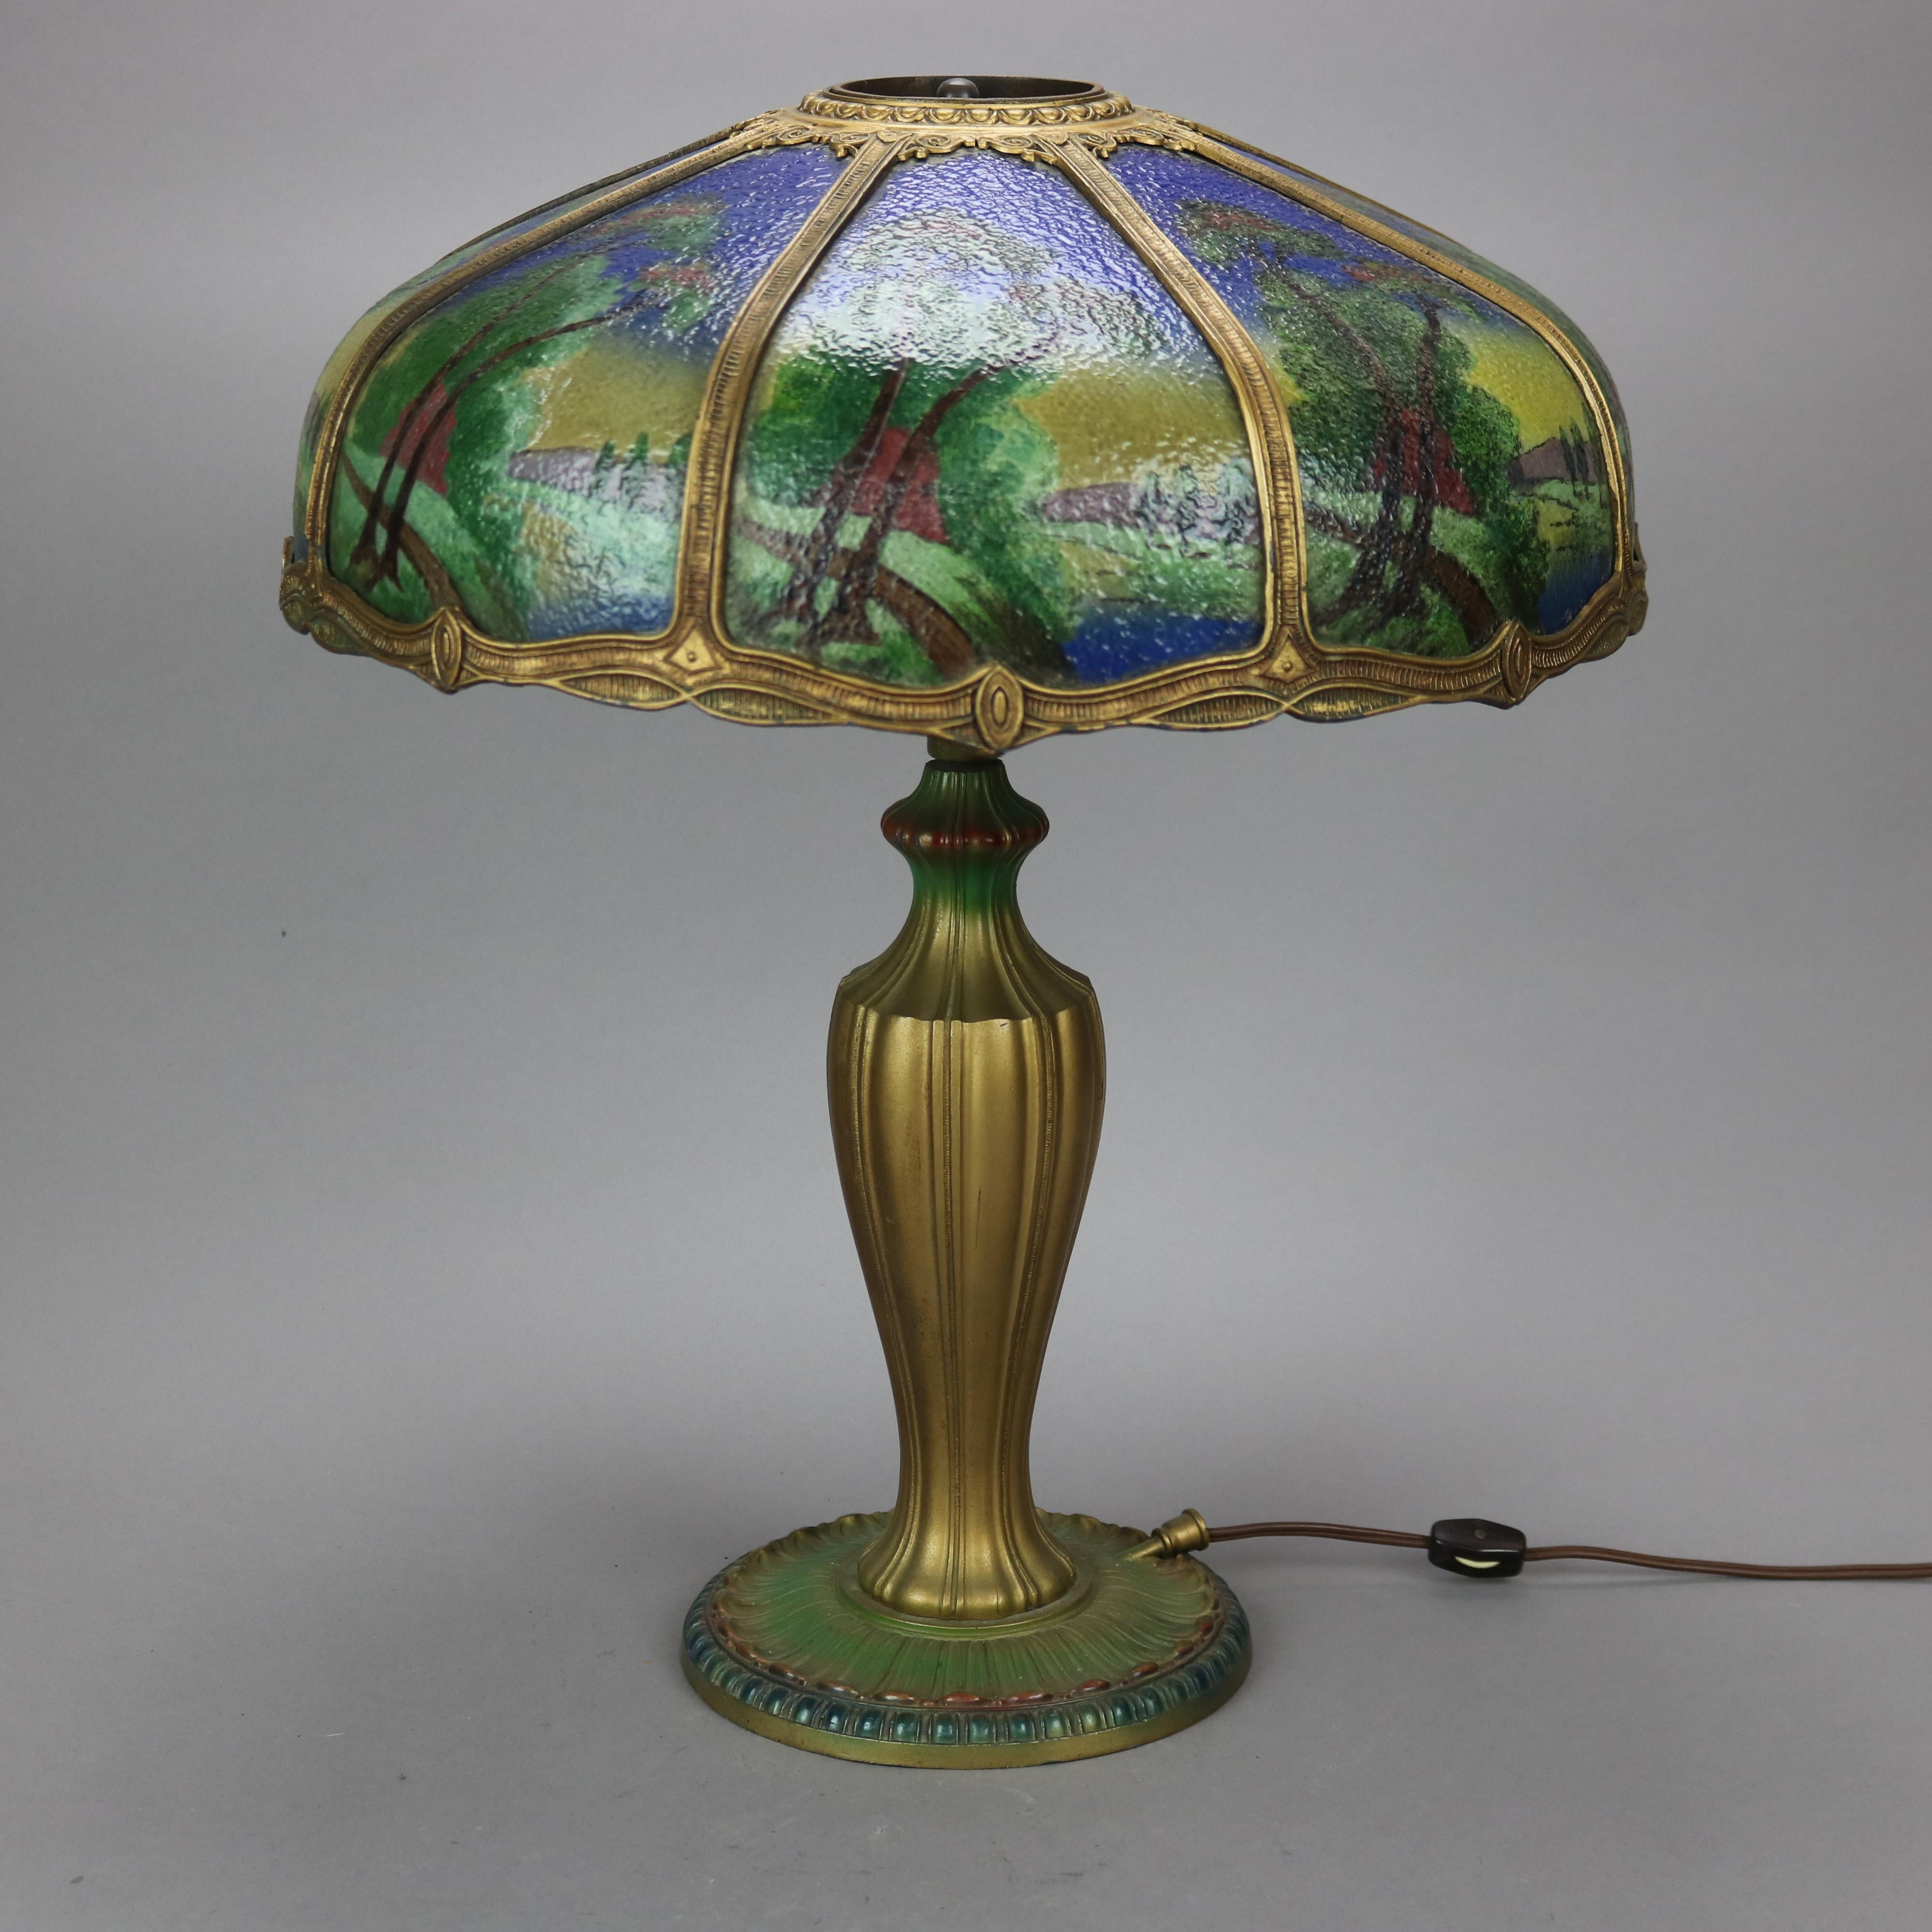 An antique Arts and Crafts table lamp in the manner of Bradley and Hubbard offers cast frame housing bent glass and hand painted glass panels having countryside scene over double socket cast urn form base, c1920

Measures - 21'' H x 17.5'' W x